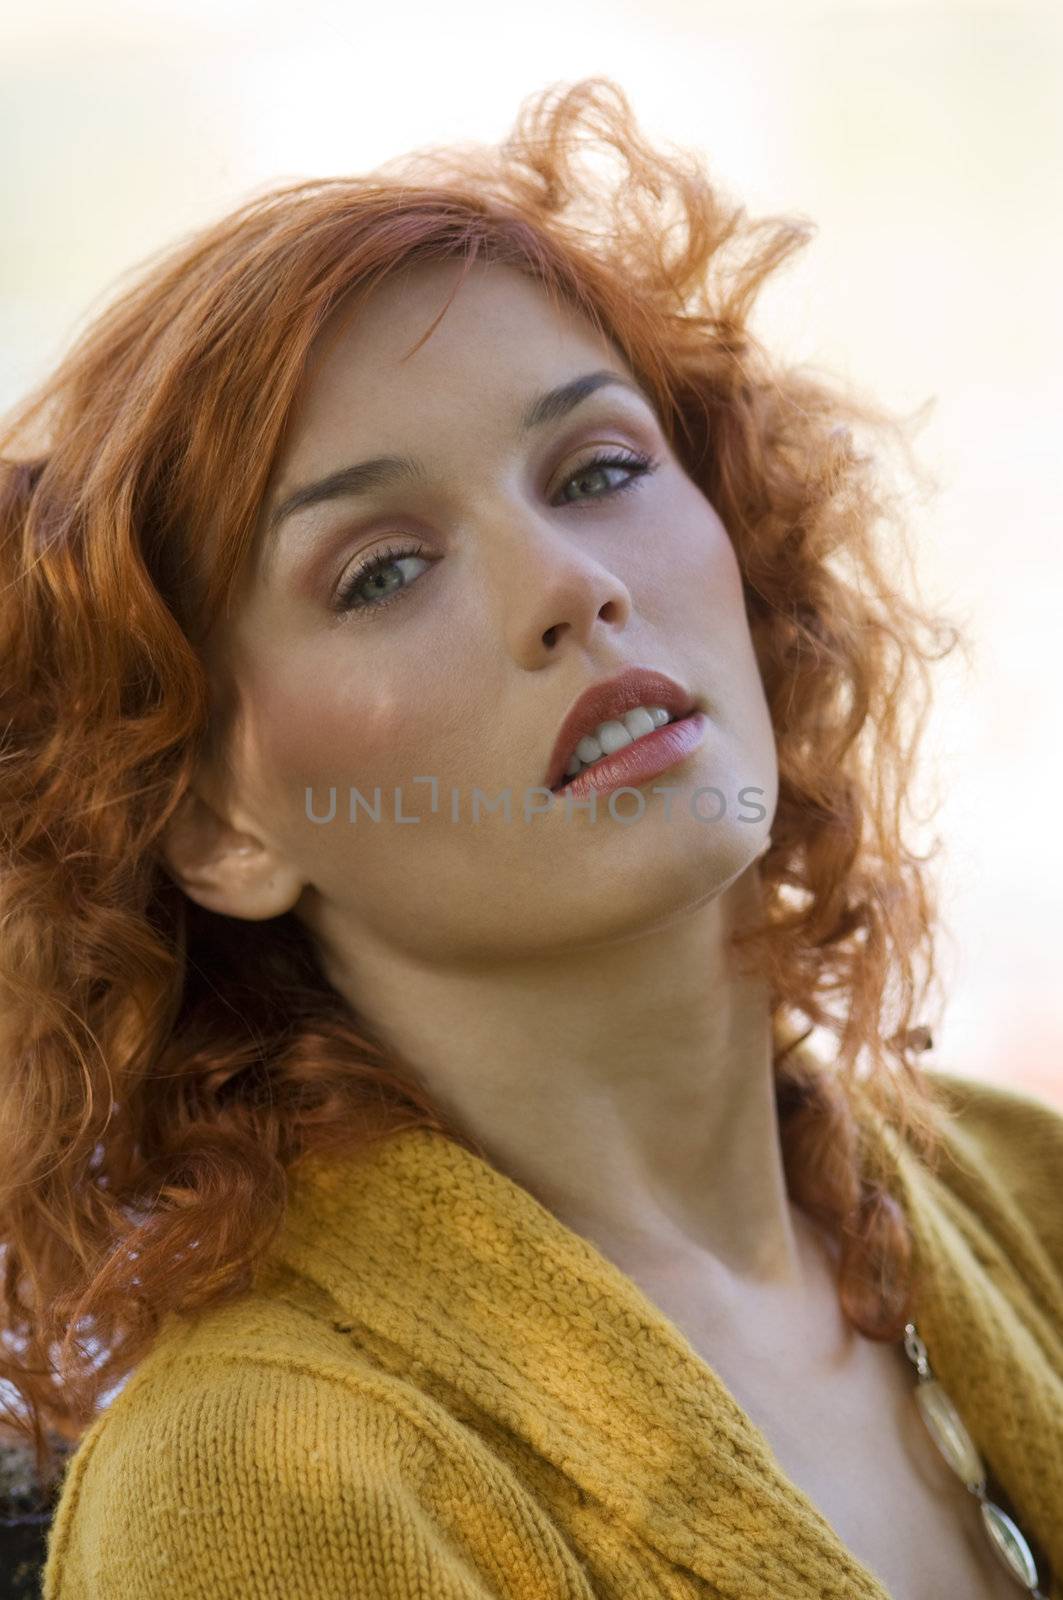 outdoor close up of red-haired woman and light eyes